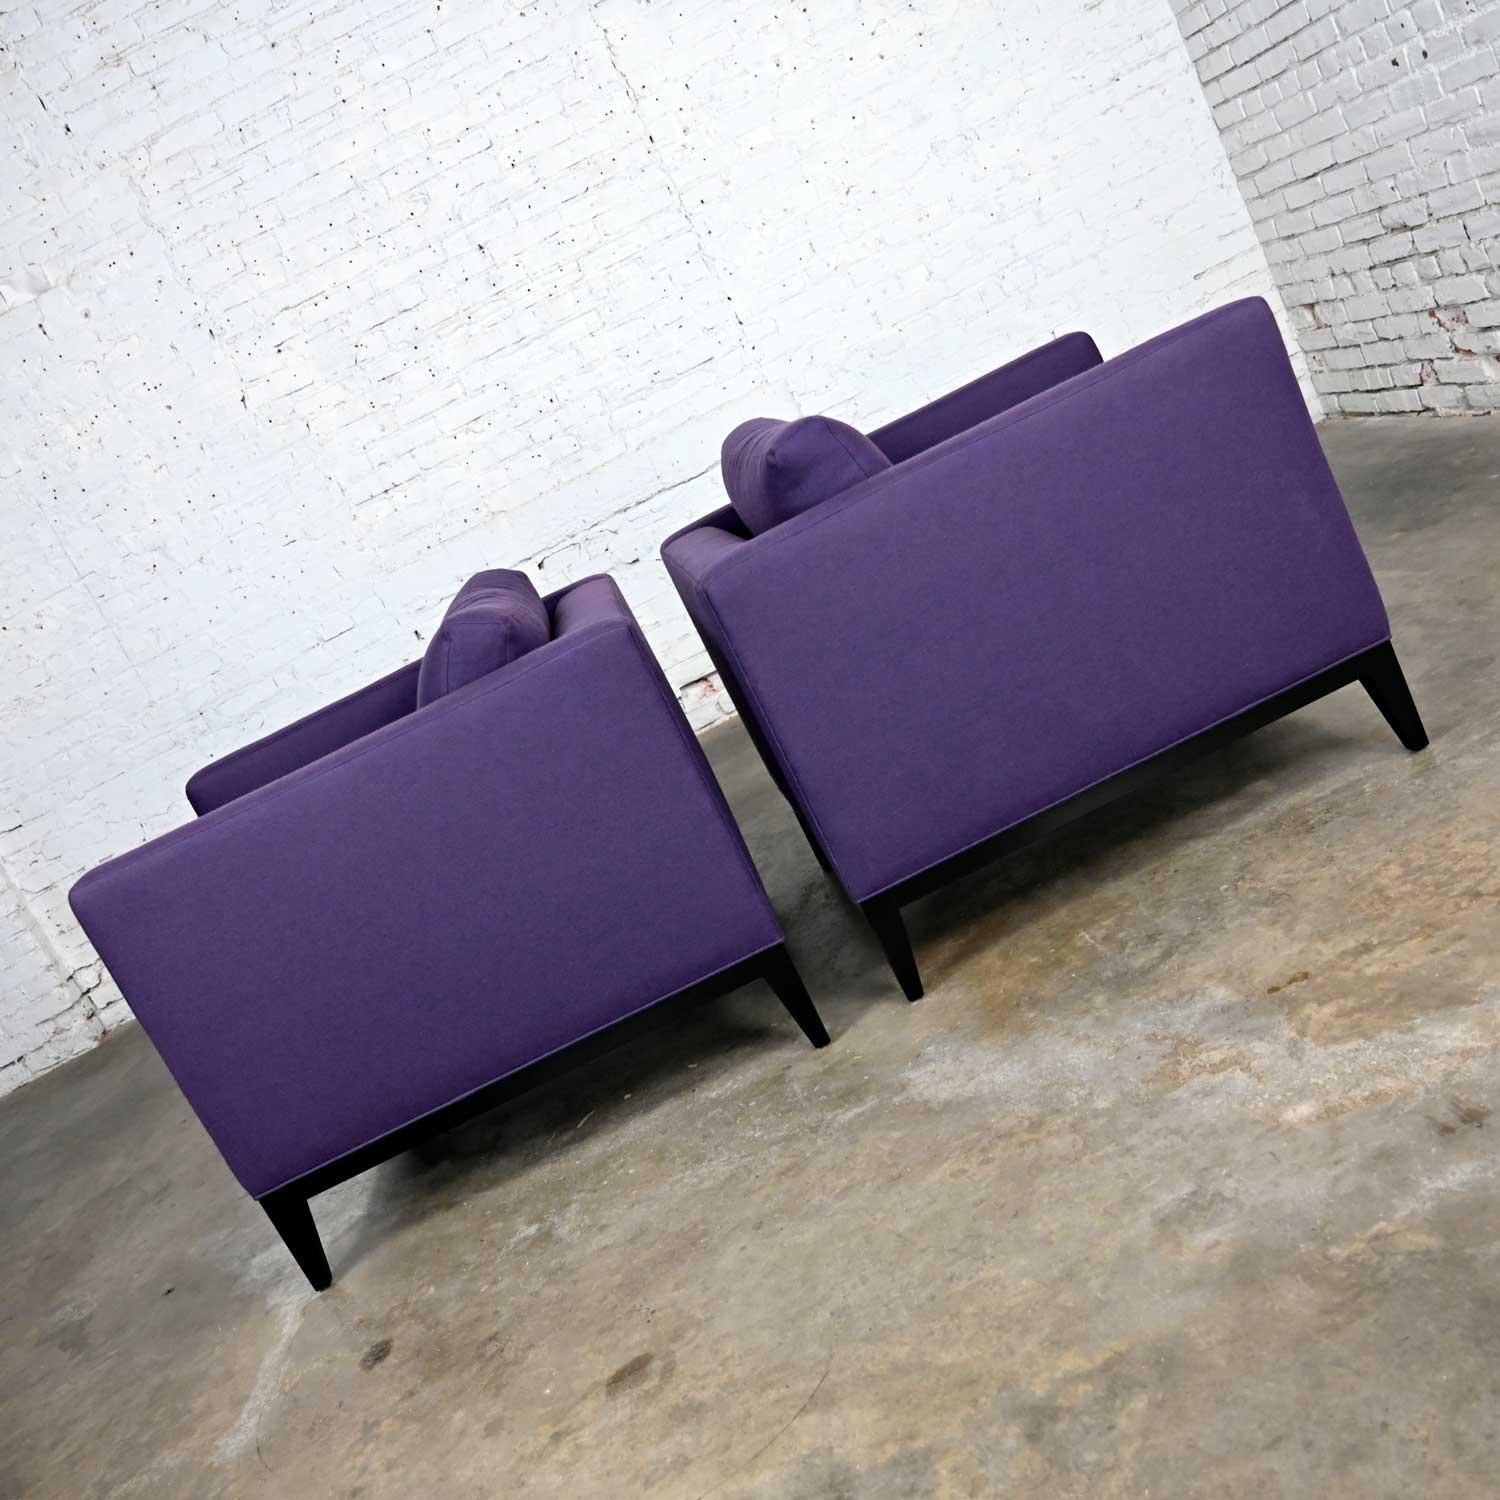 American Modern Purple Plum Tone Tuxedo Style Club Chairs by Baker a Pair For Sale